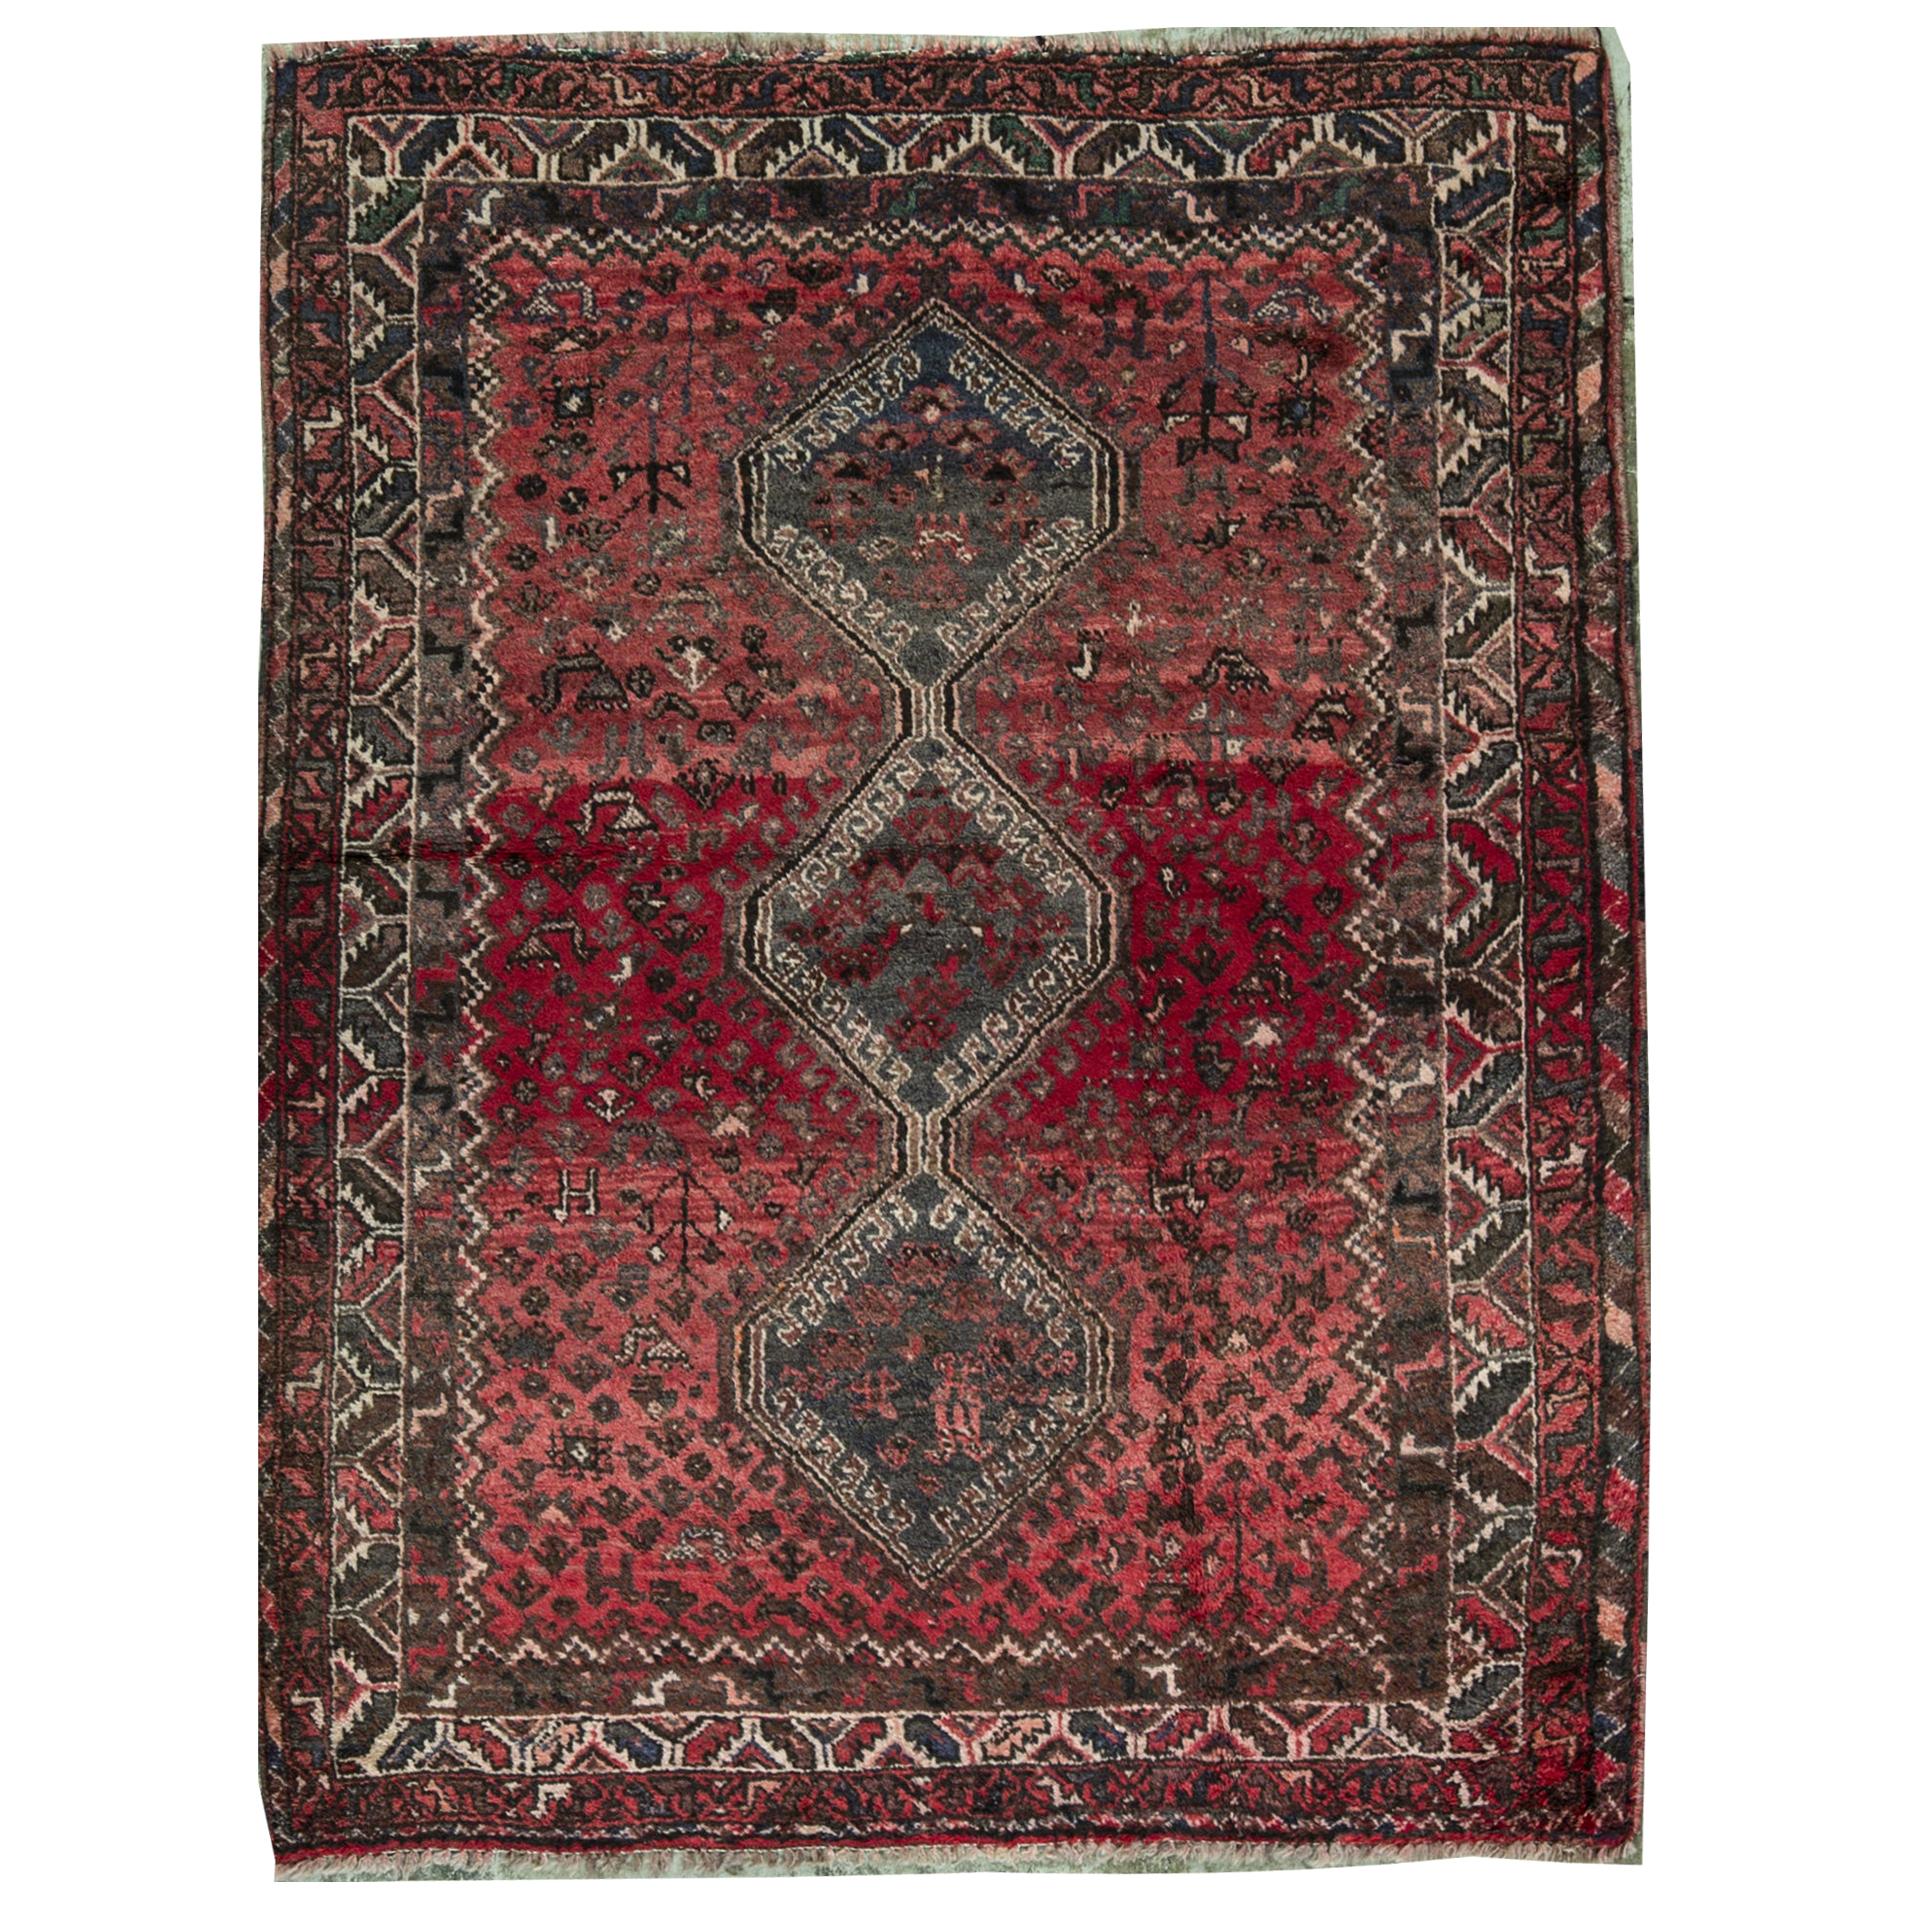 One of a Kind Traditional Handwoven Wool Area Rug 4’6" x 7’.  